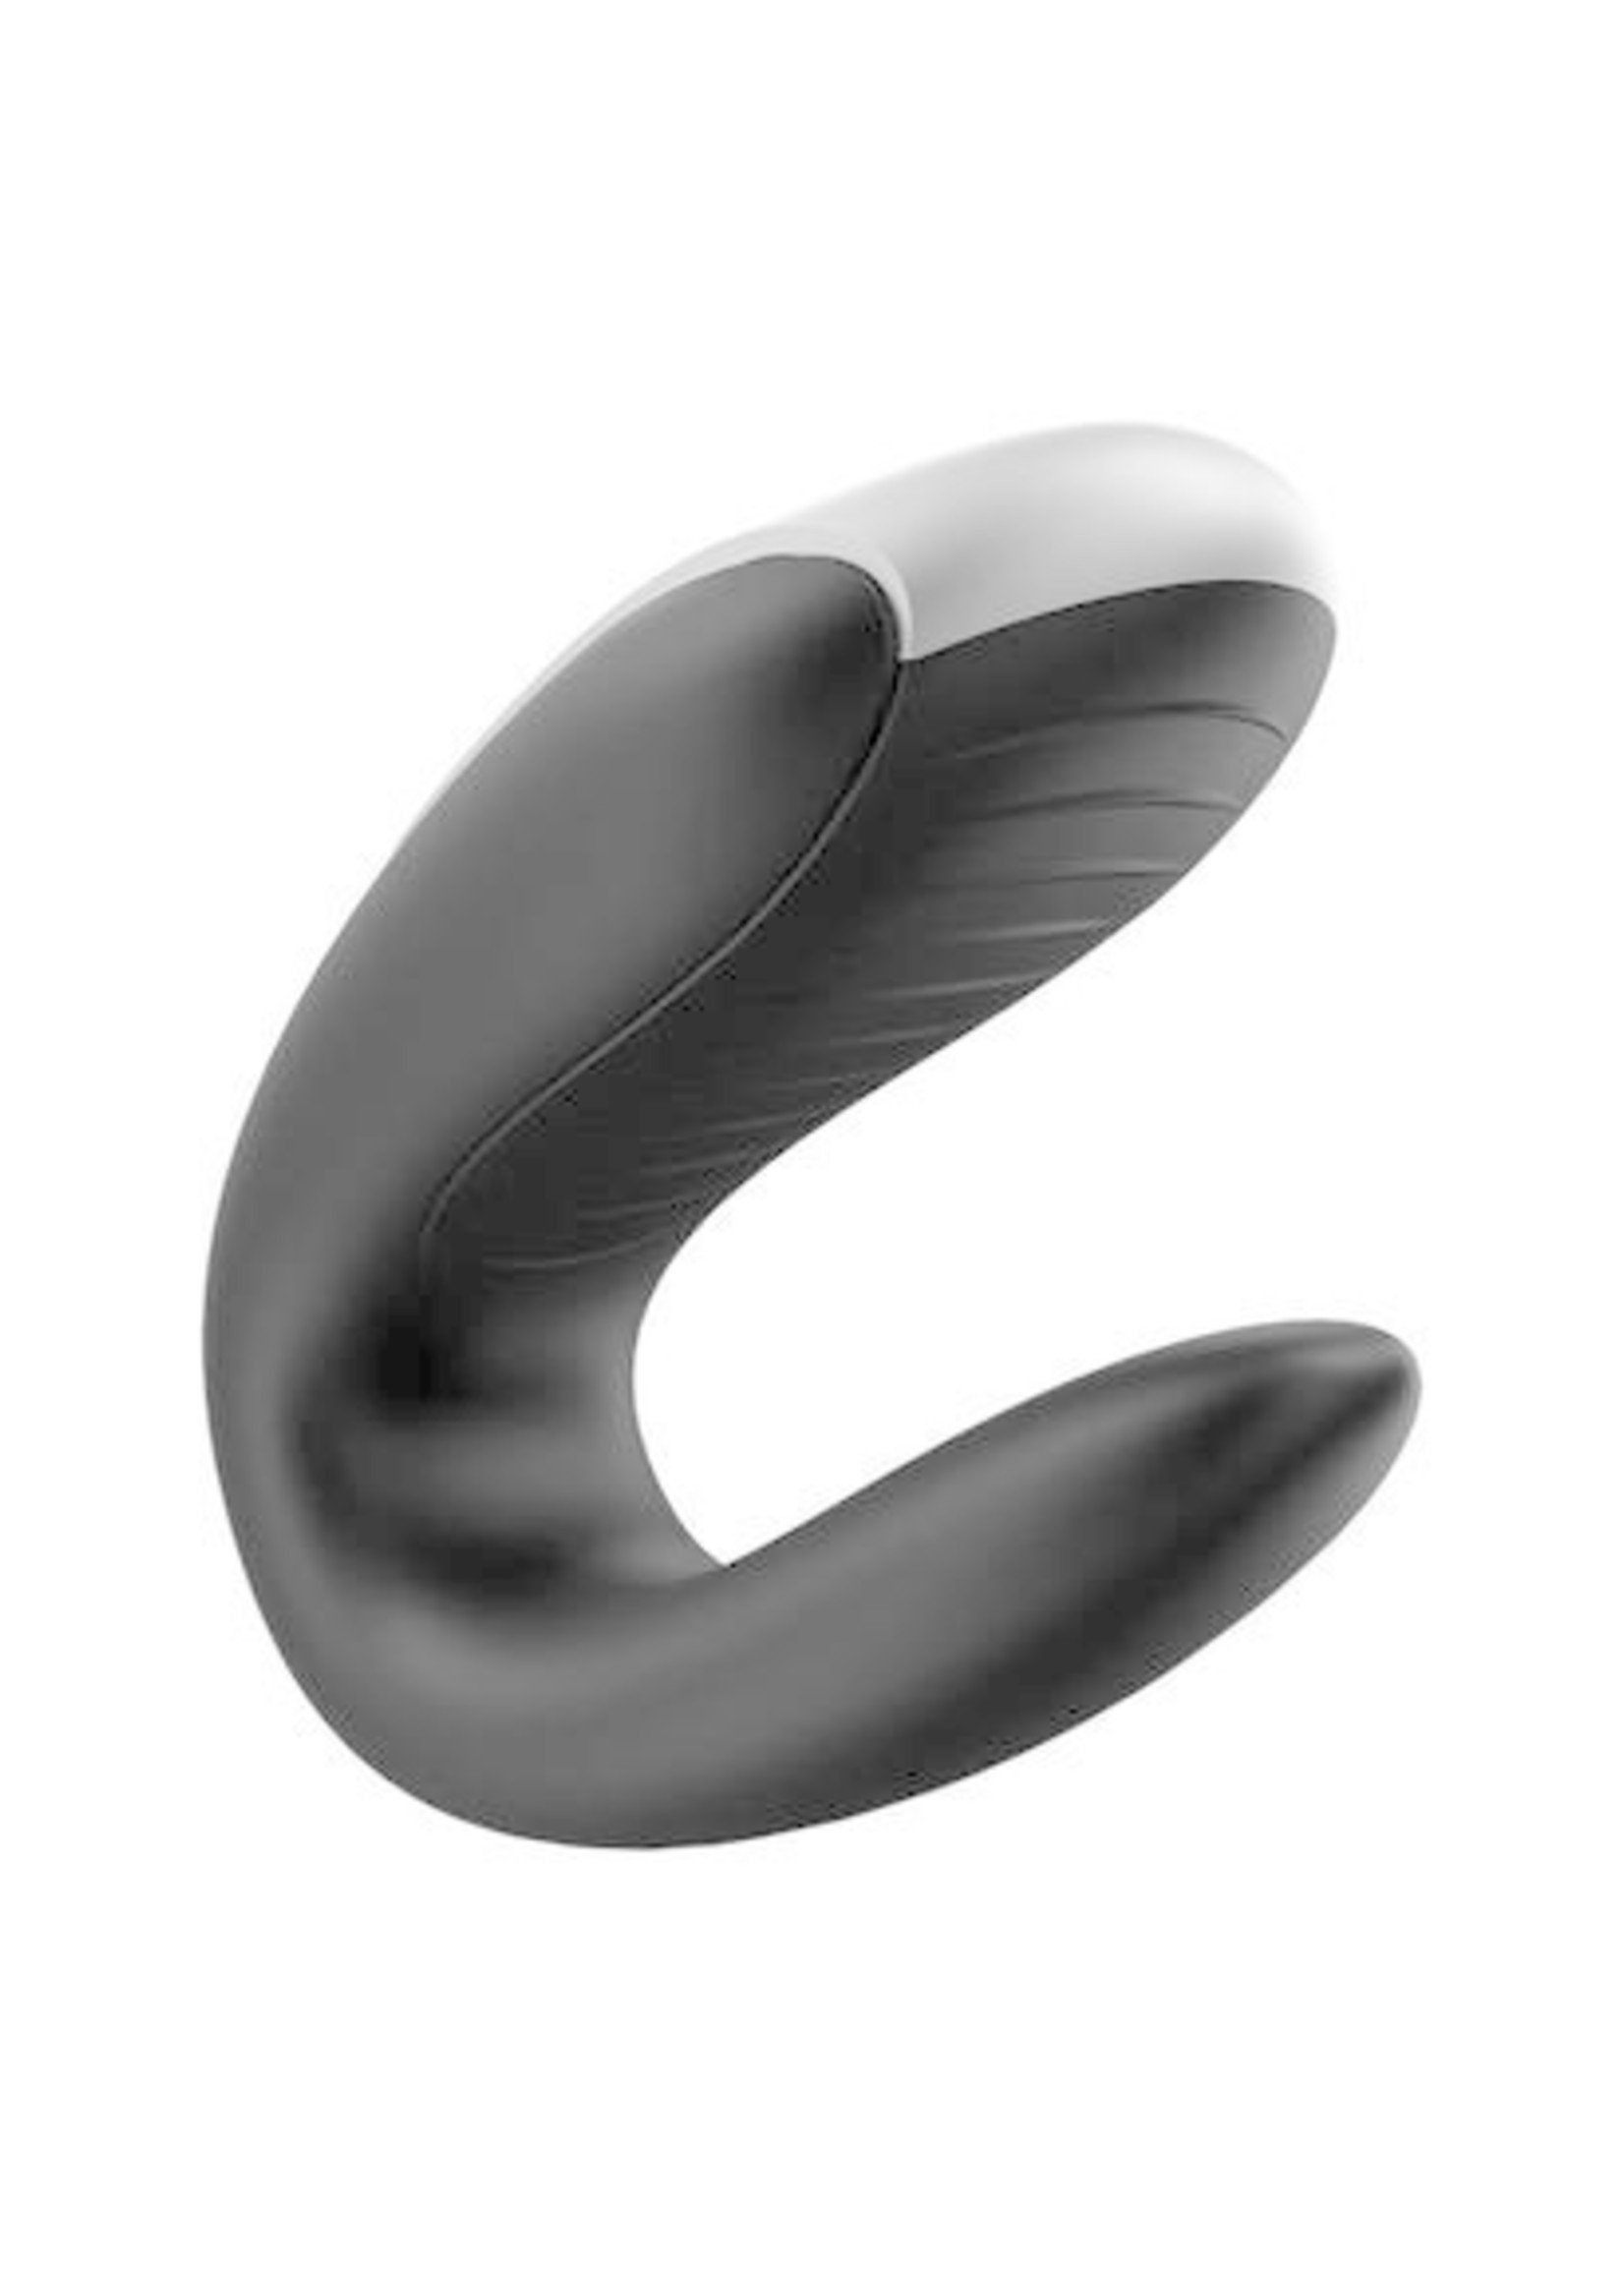 Satisfyer Double Fun Silicone Rechargeable Dual Vibrator with Remote Control - Black